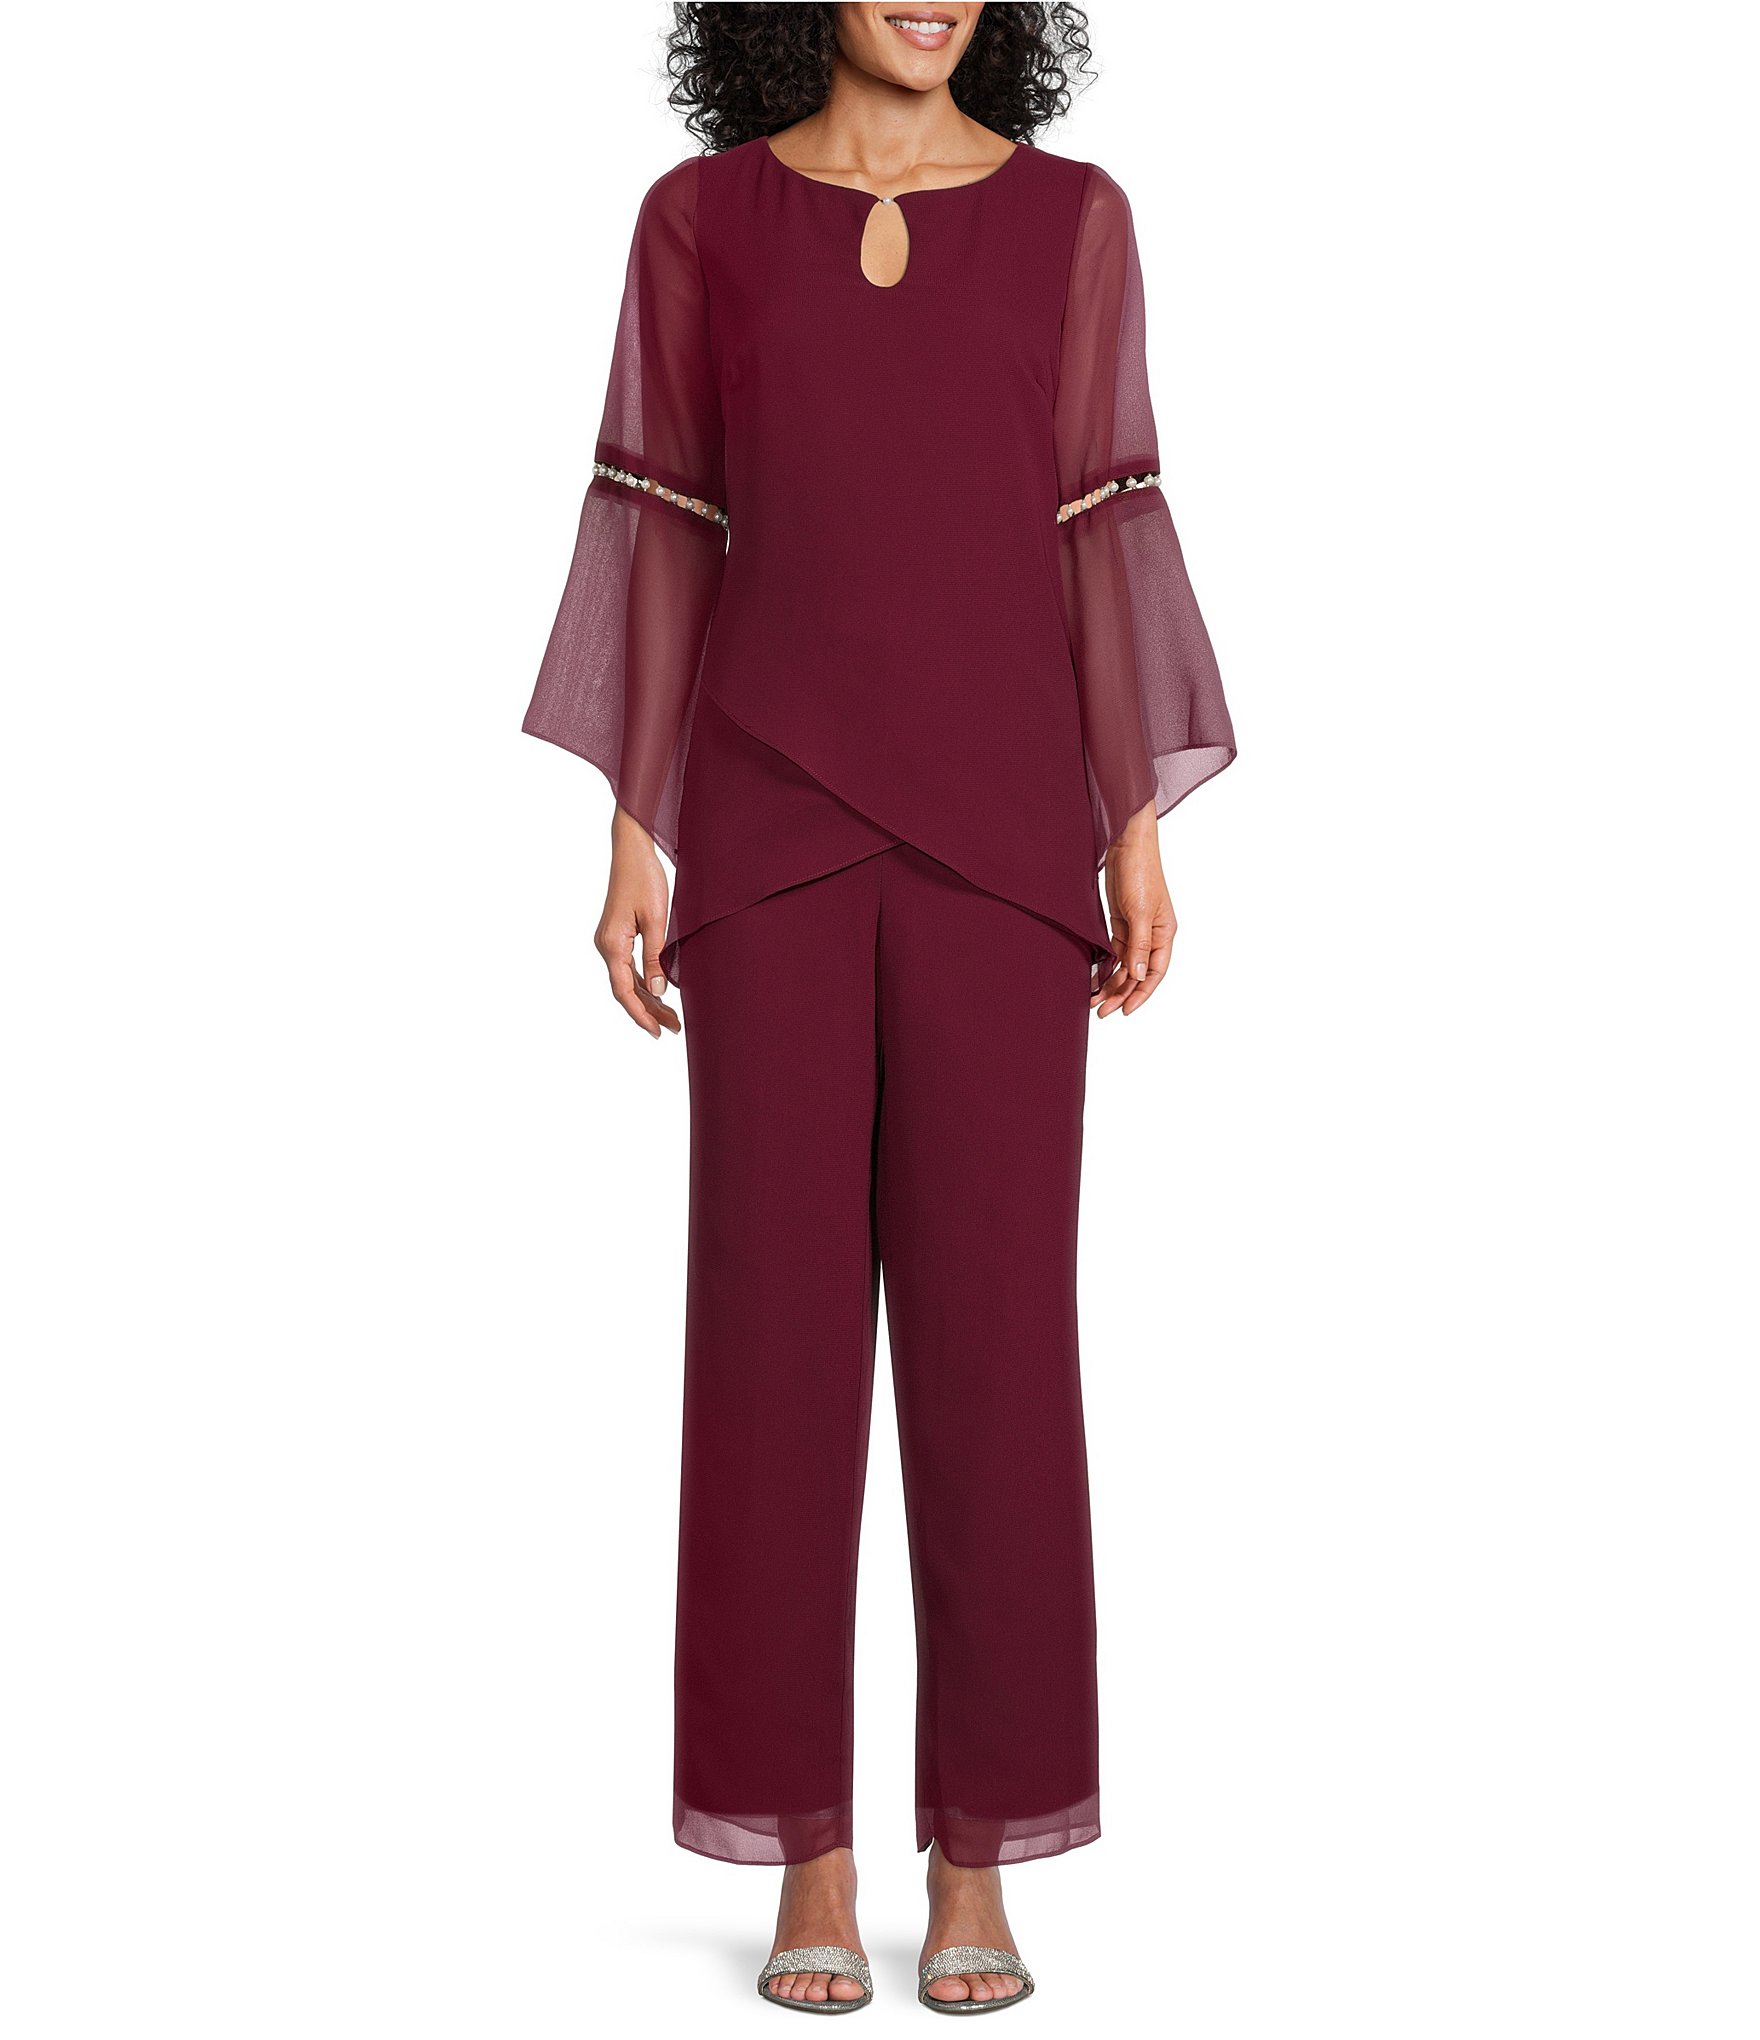 Red Mother of the Bride Pant Suits & Sets | Dillard's